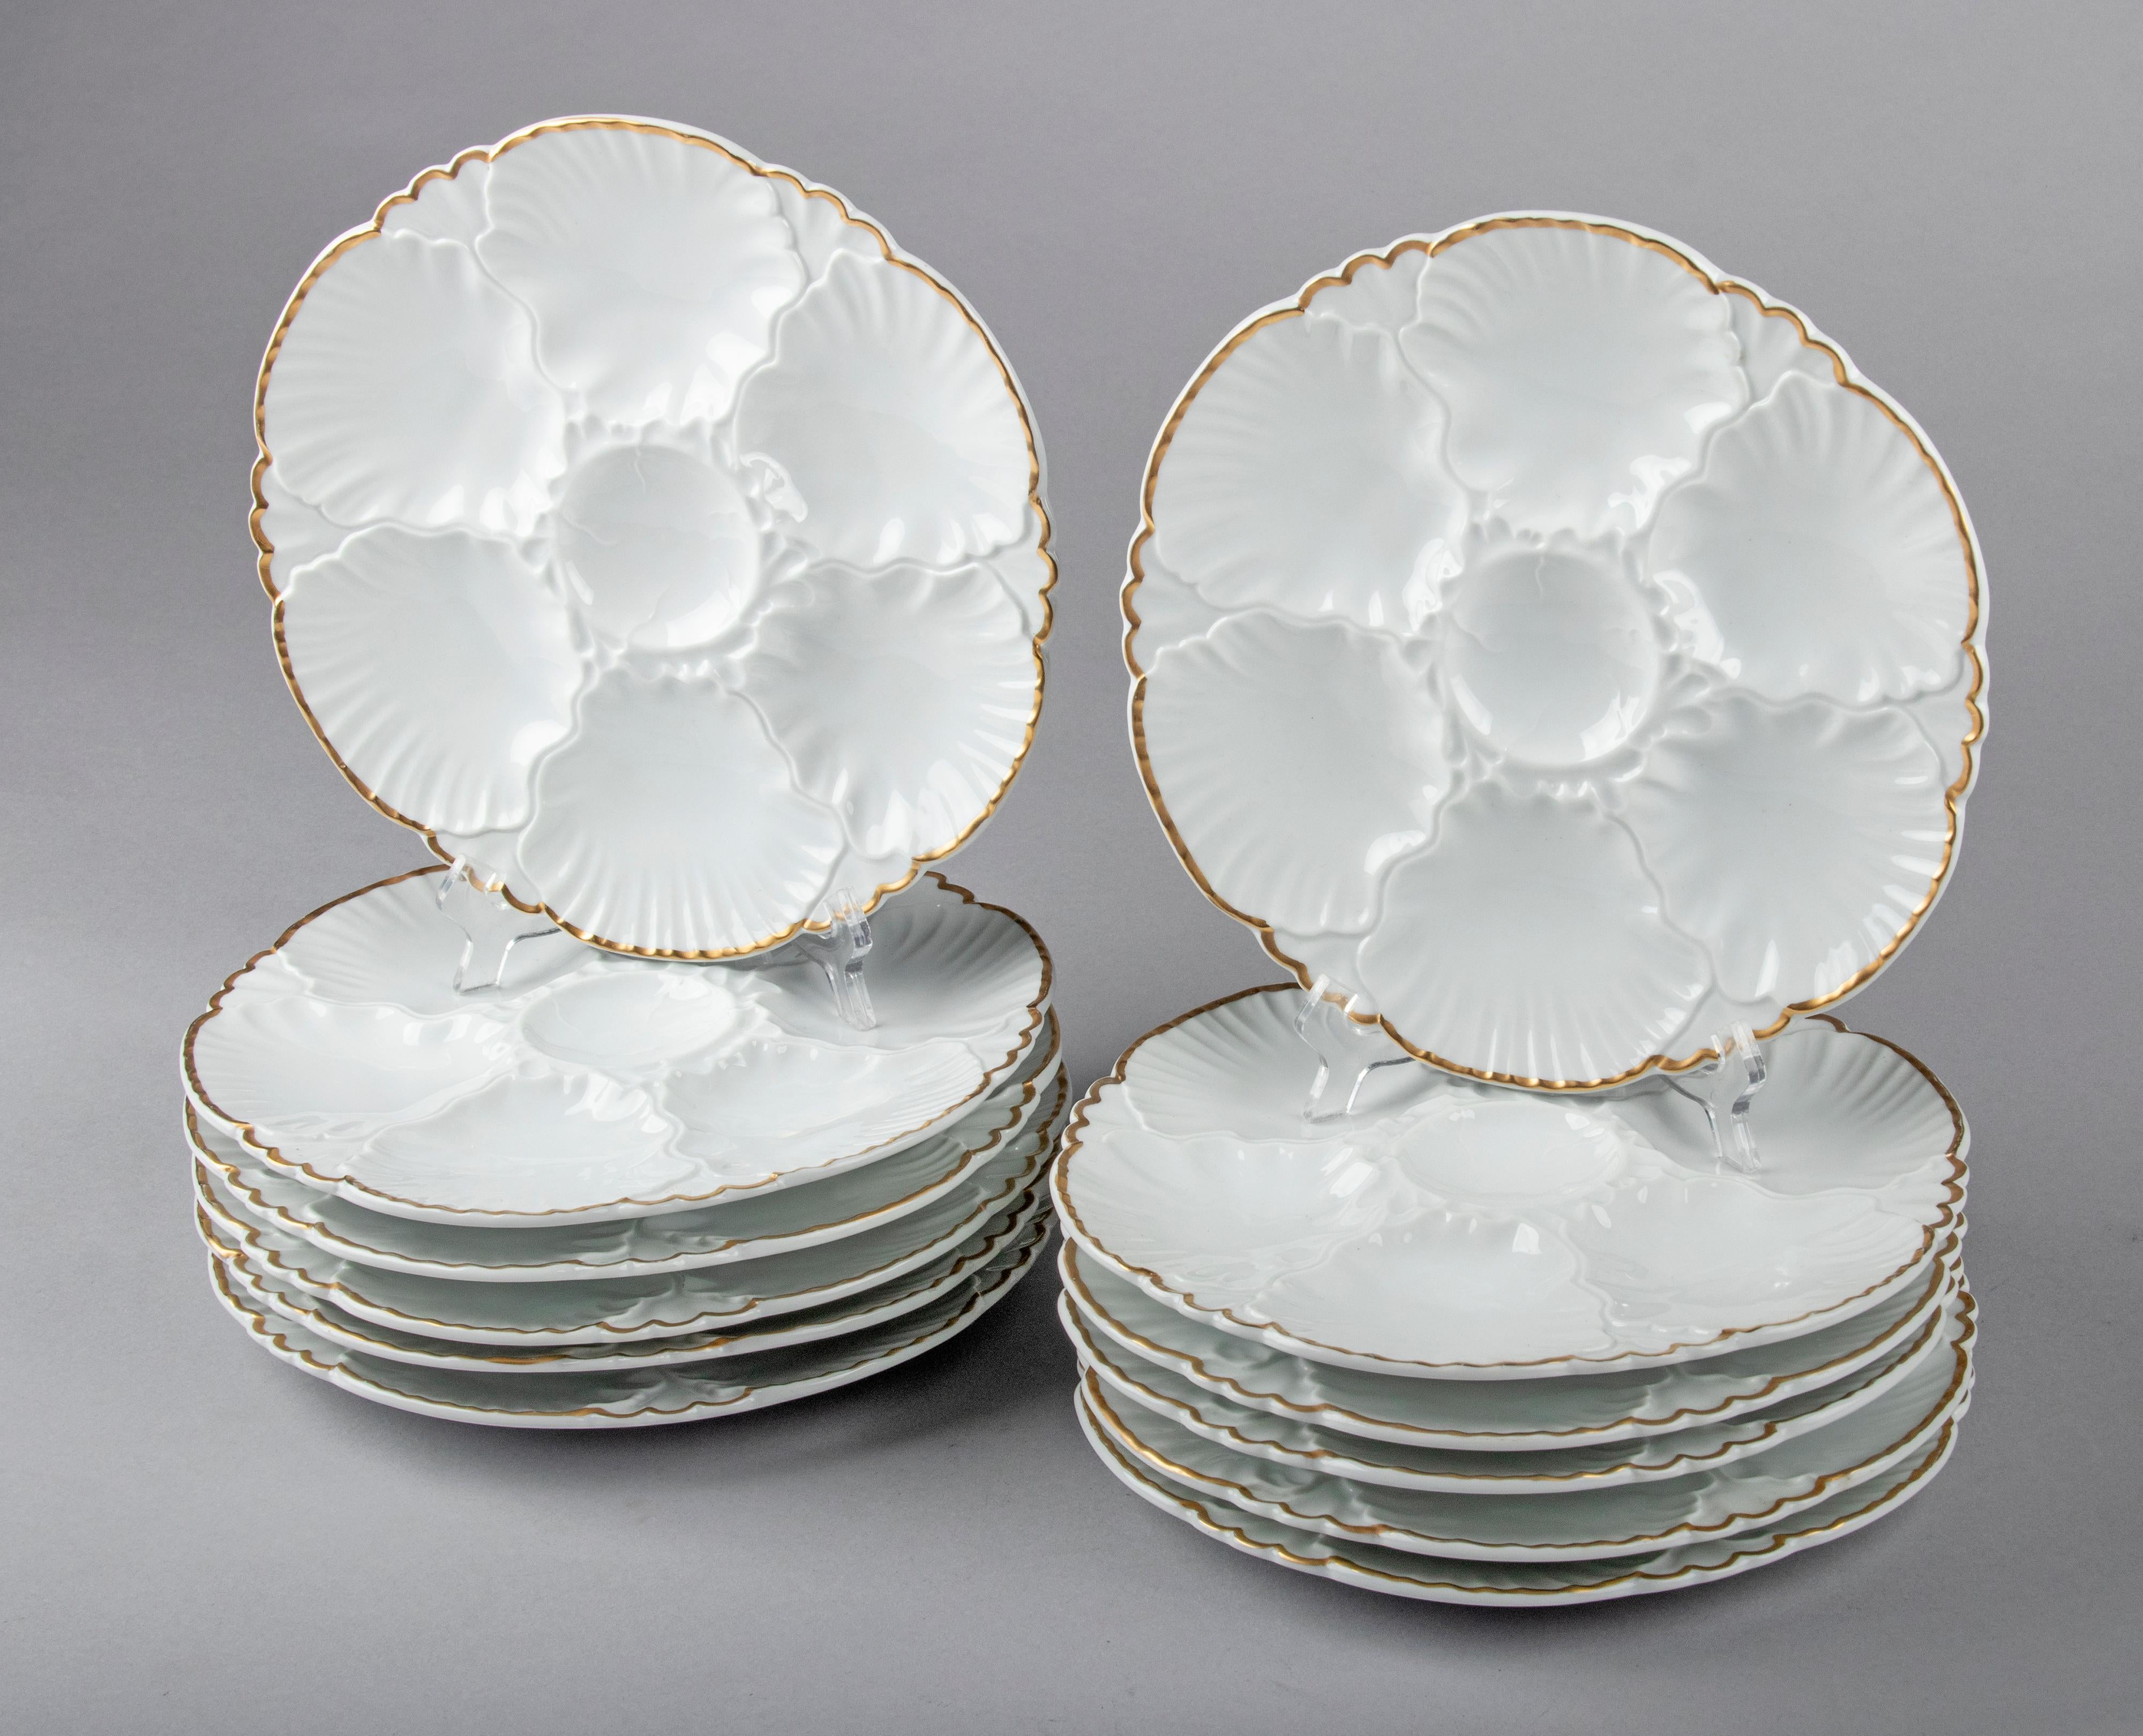 Hand-Crafted Set of 12 Porcelain Oysterplates Made by Cerabel